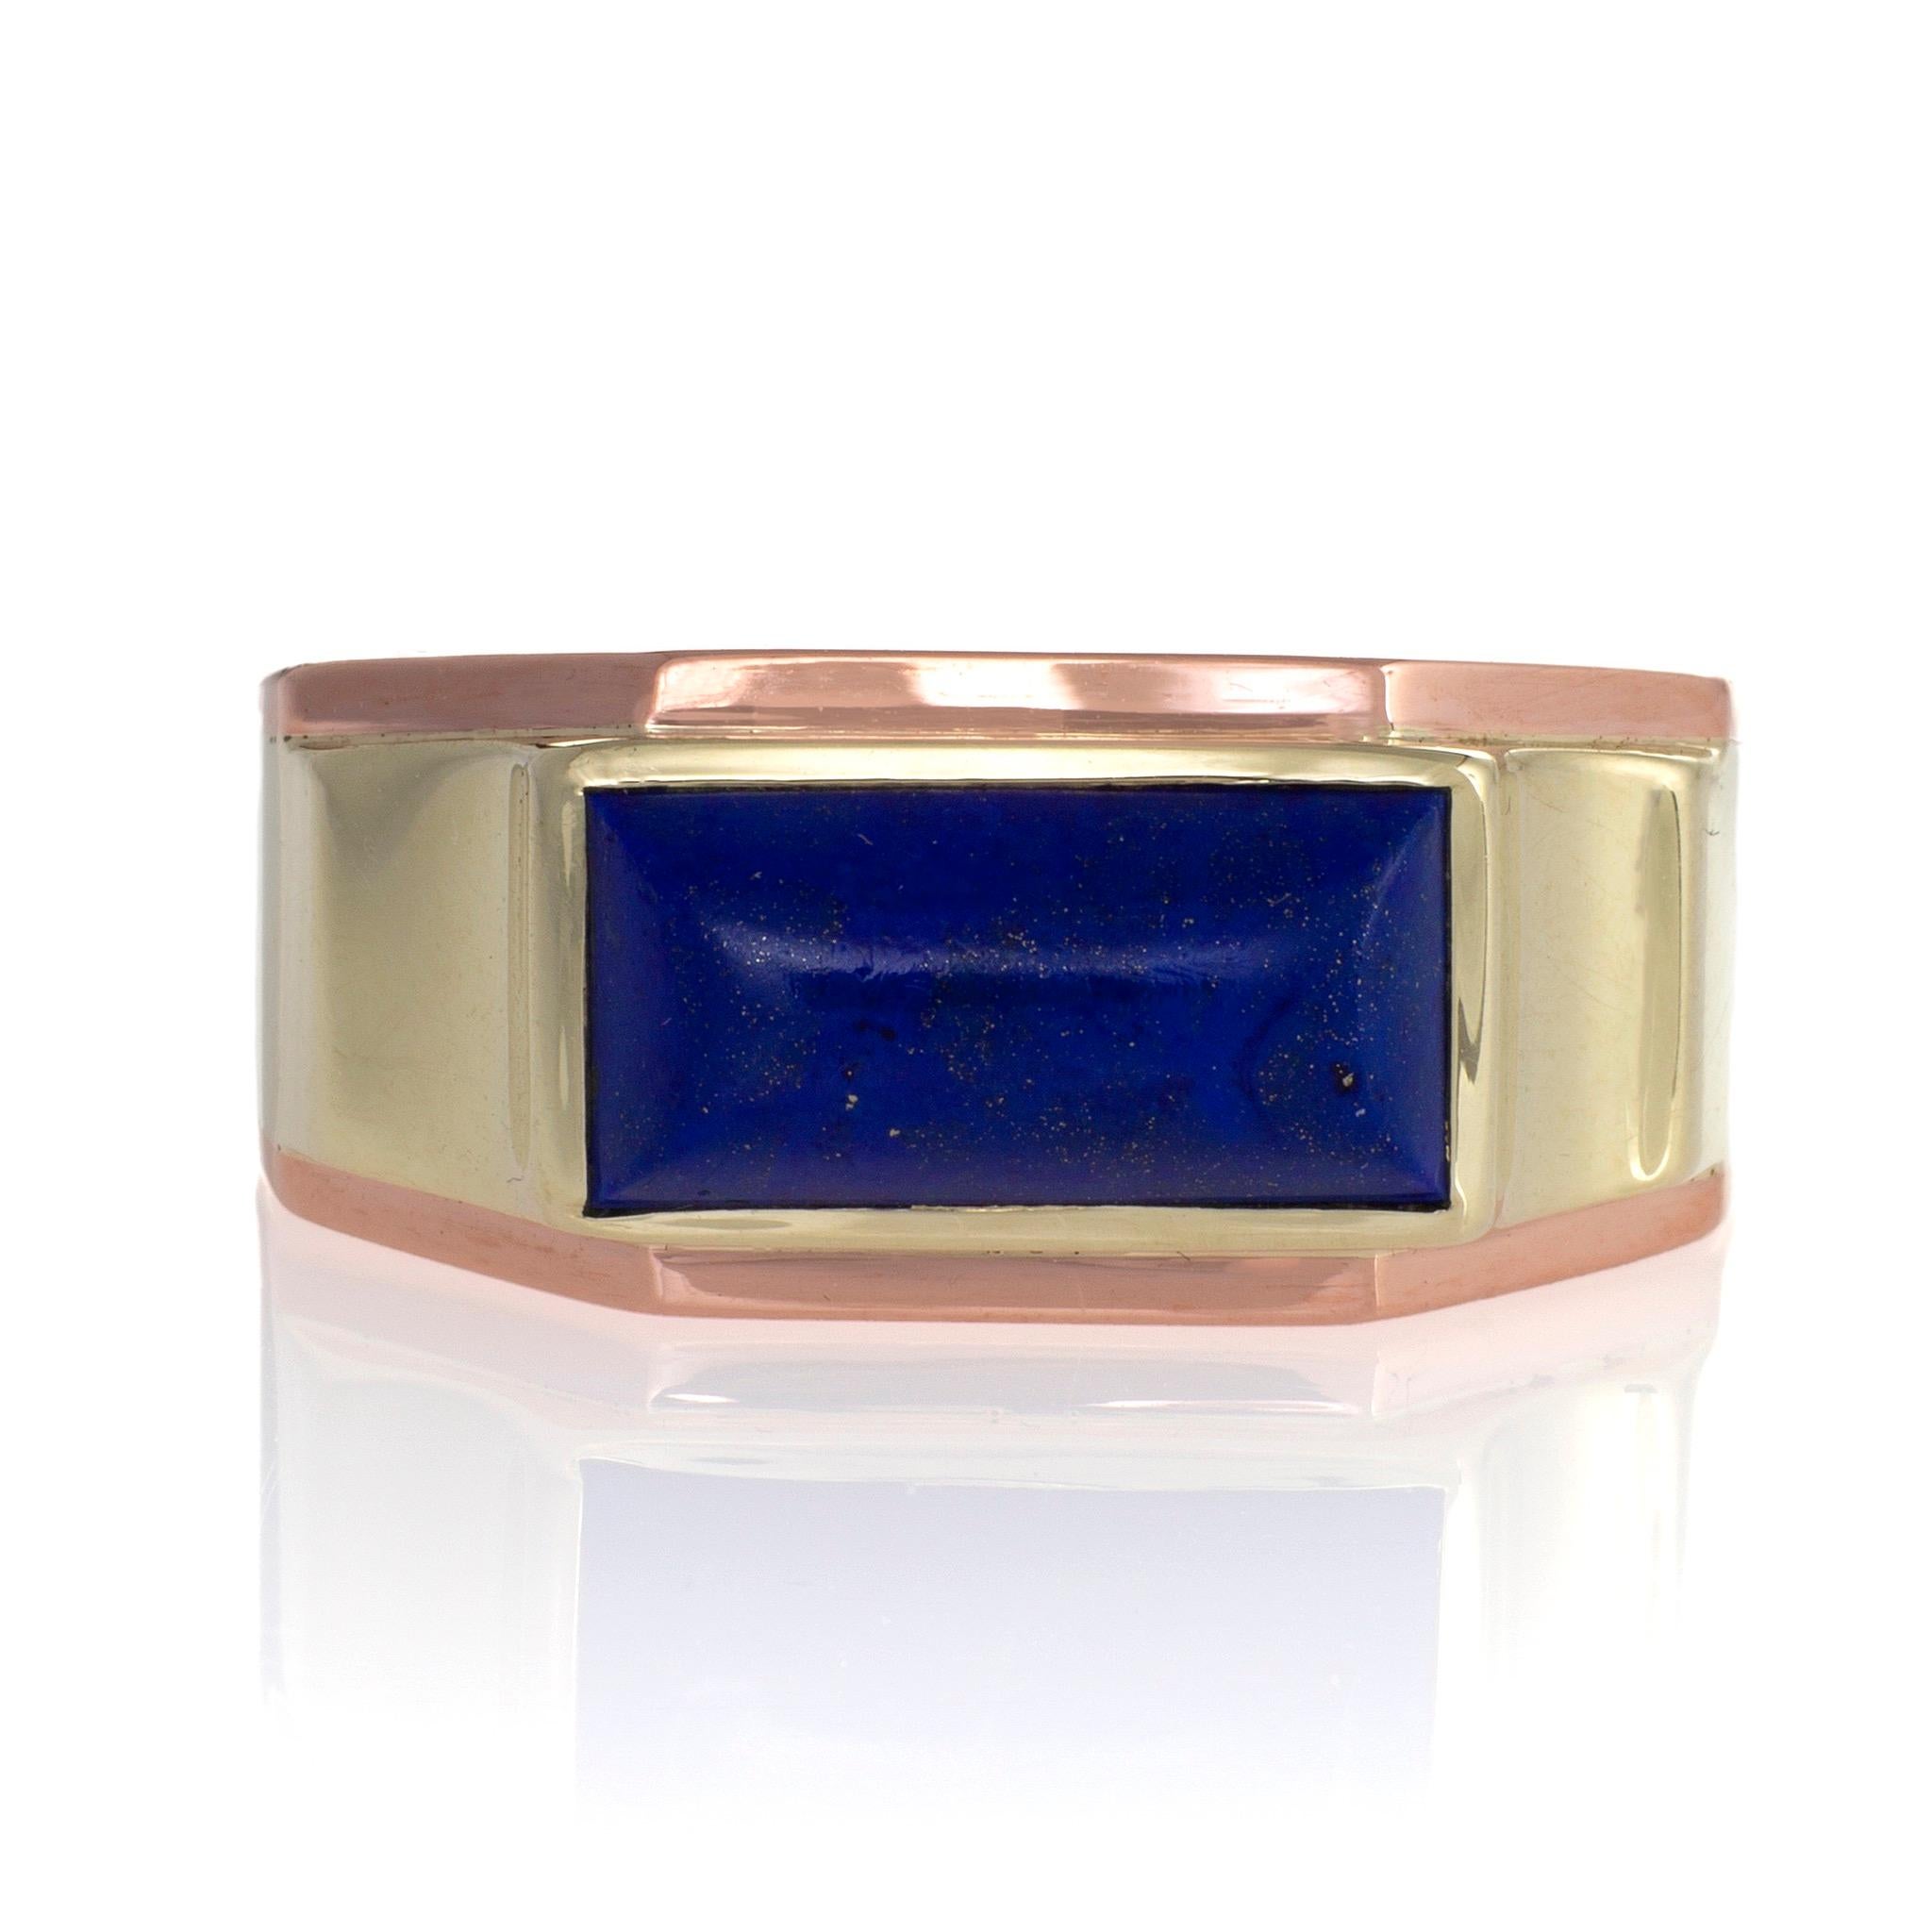 Made by the New York and San Francisco firm J.R. Wood & Sons, this streamlined late Art Deco ring dating from the 1930s is set with a lapis cabochon in bi-color gold. The elongated lapis sugarloaf cabochon is edged by an arched rose gold border, and